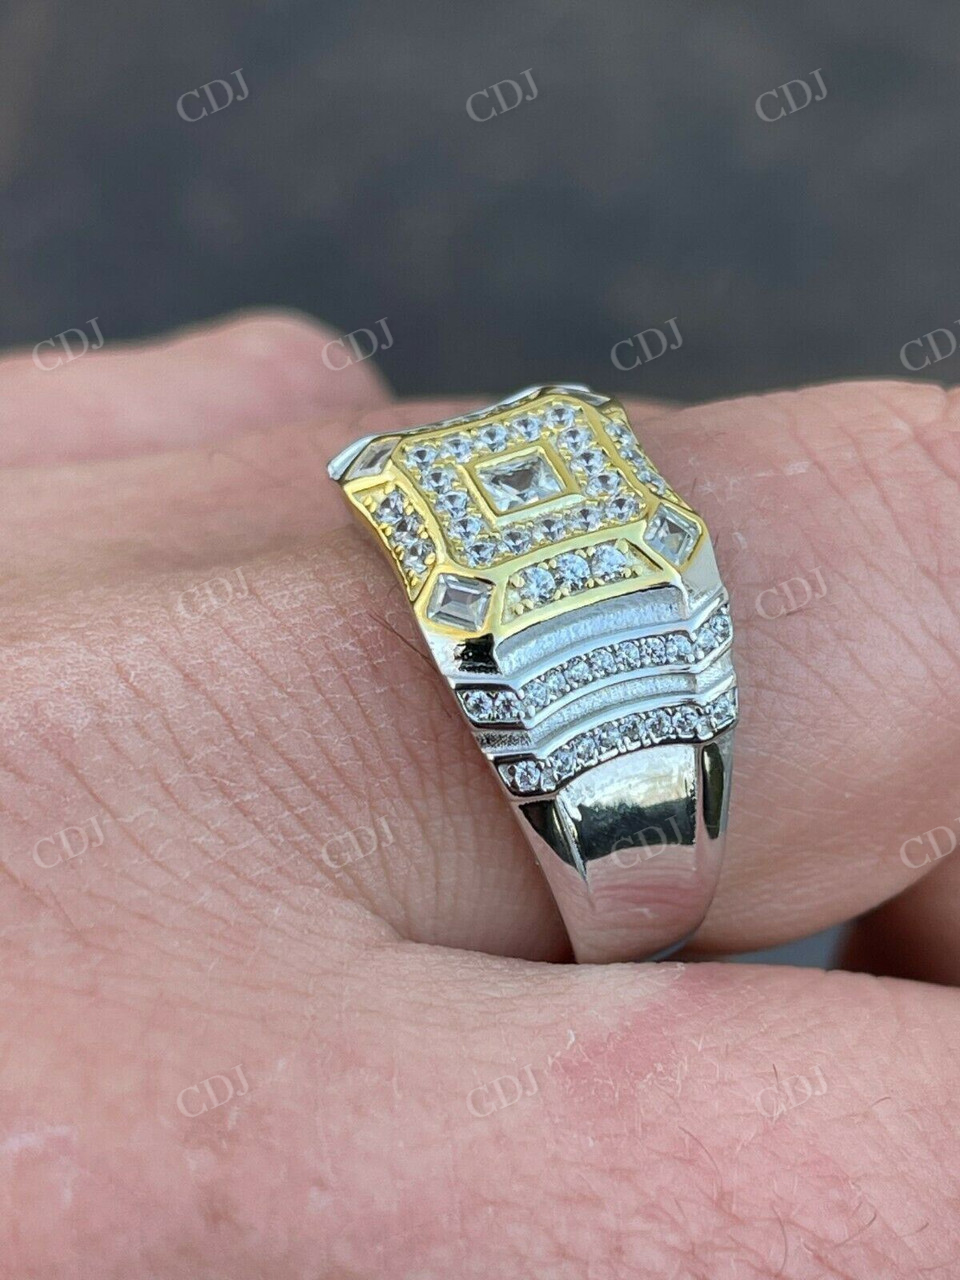 Two Tone Alternating Baguette And Round Square Hip Hop Ring  customdiamjewel   